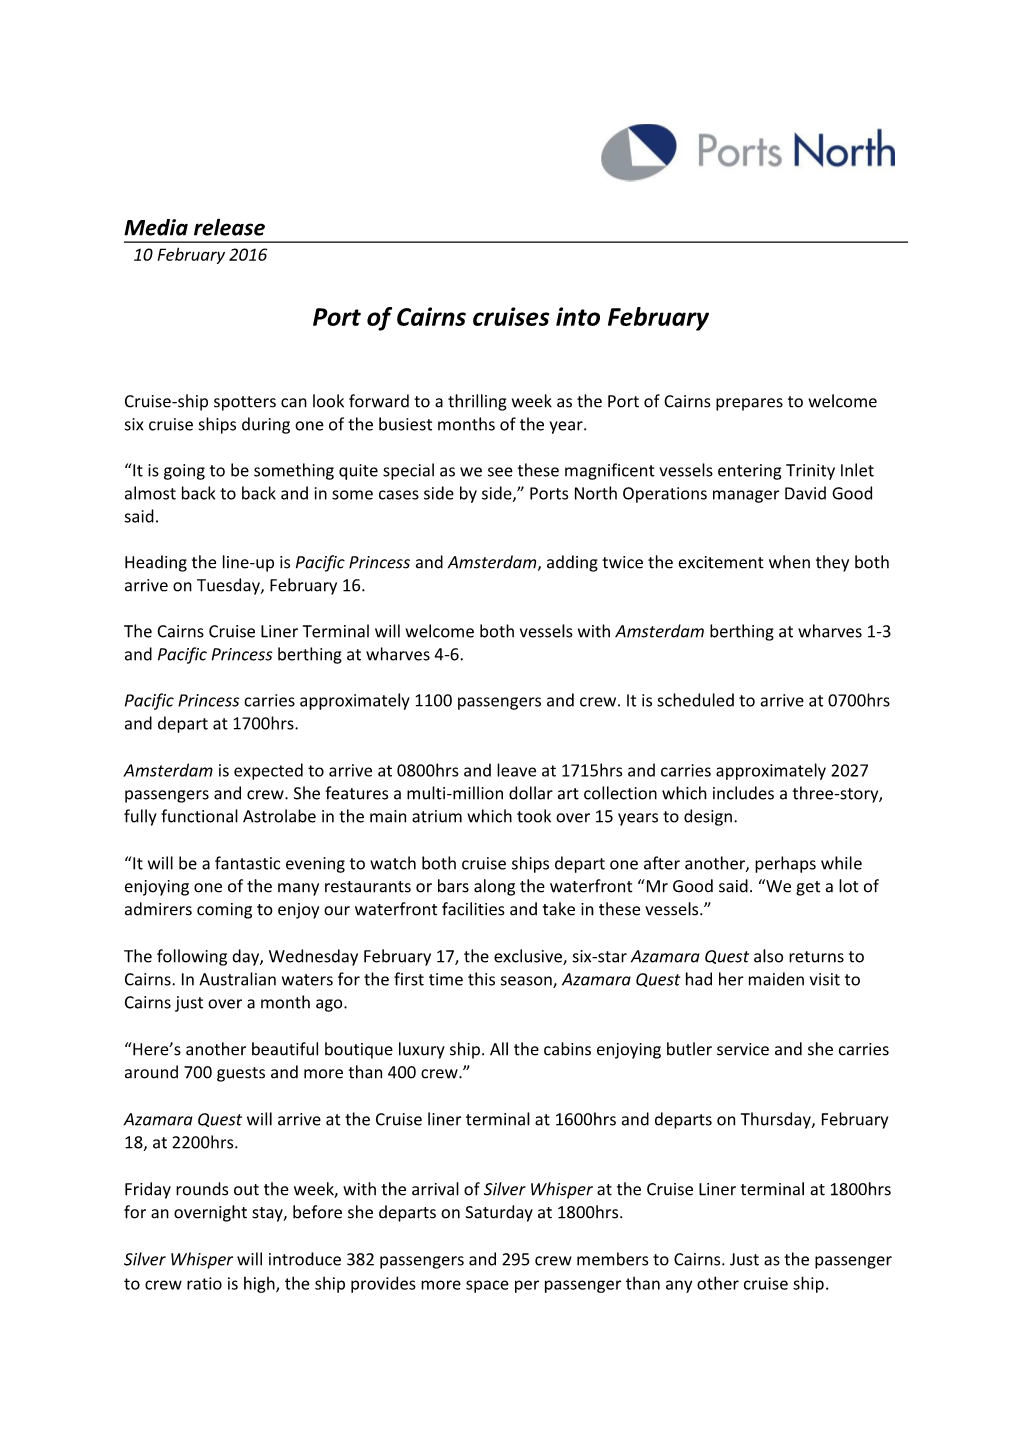 Port of Cairns Cruises Into February